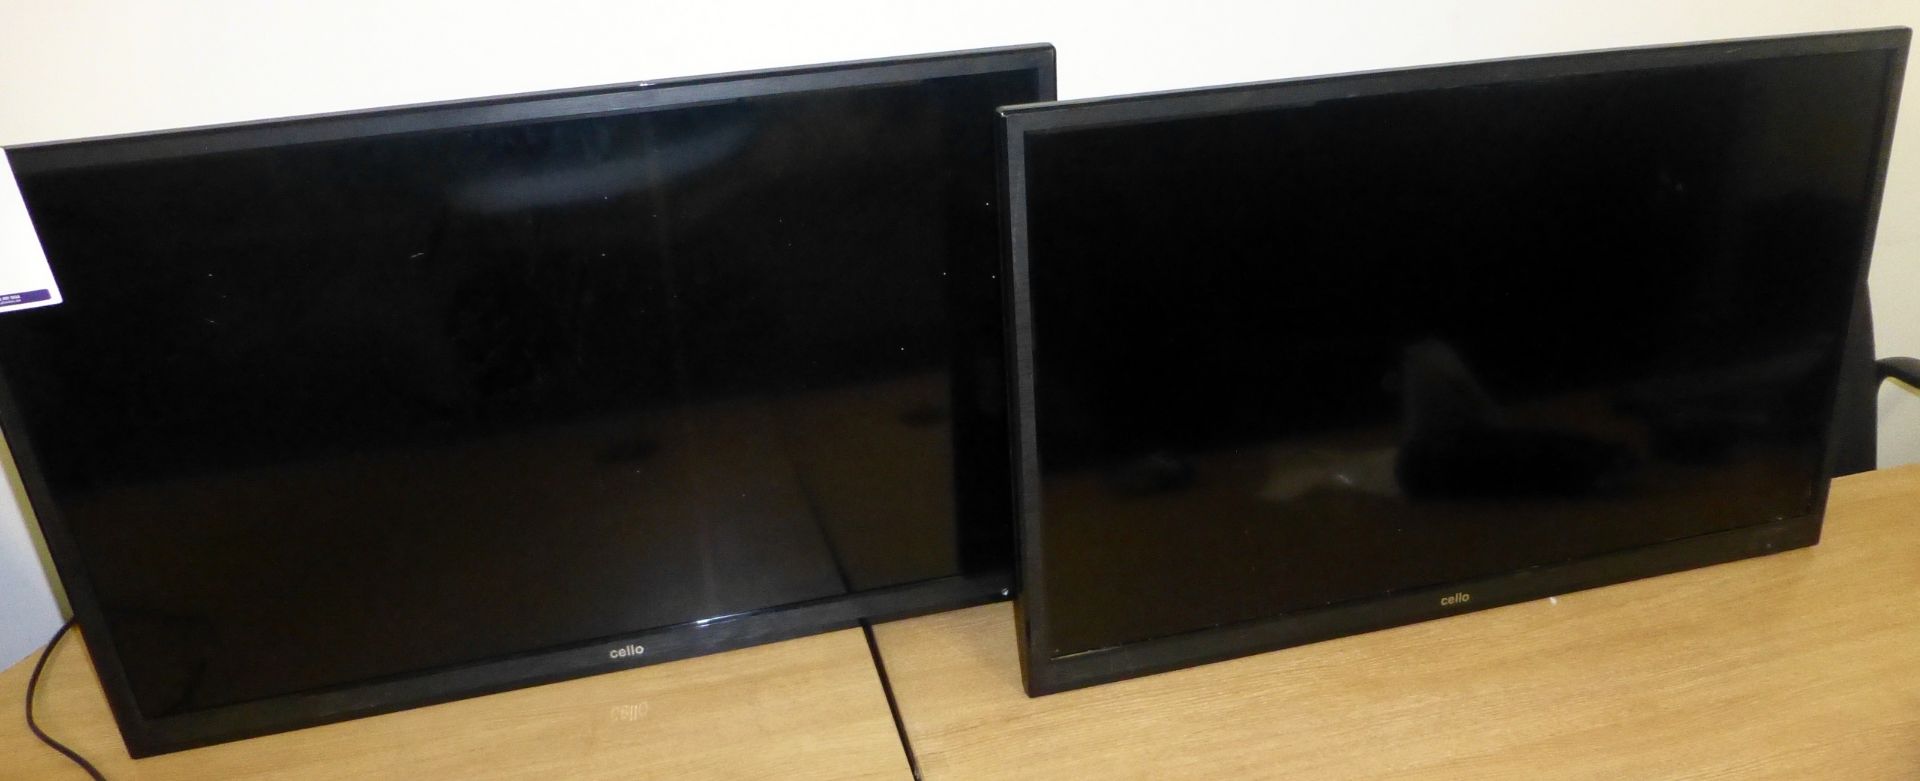 2 Cello 32" LCD Display/TV, No Stands (Located 82 Rolfe Street, Smethwick, B66 2AX)